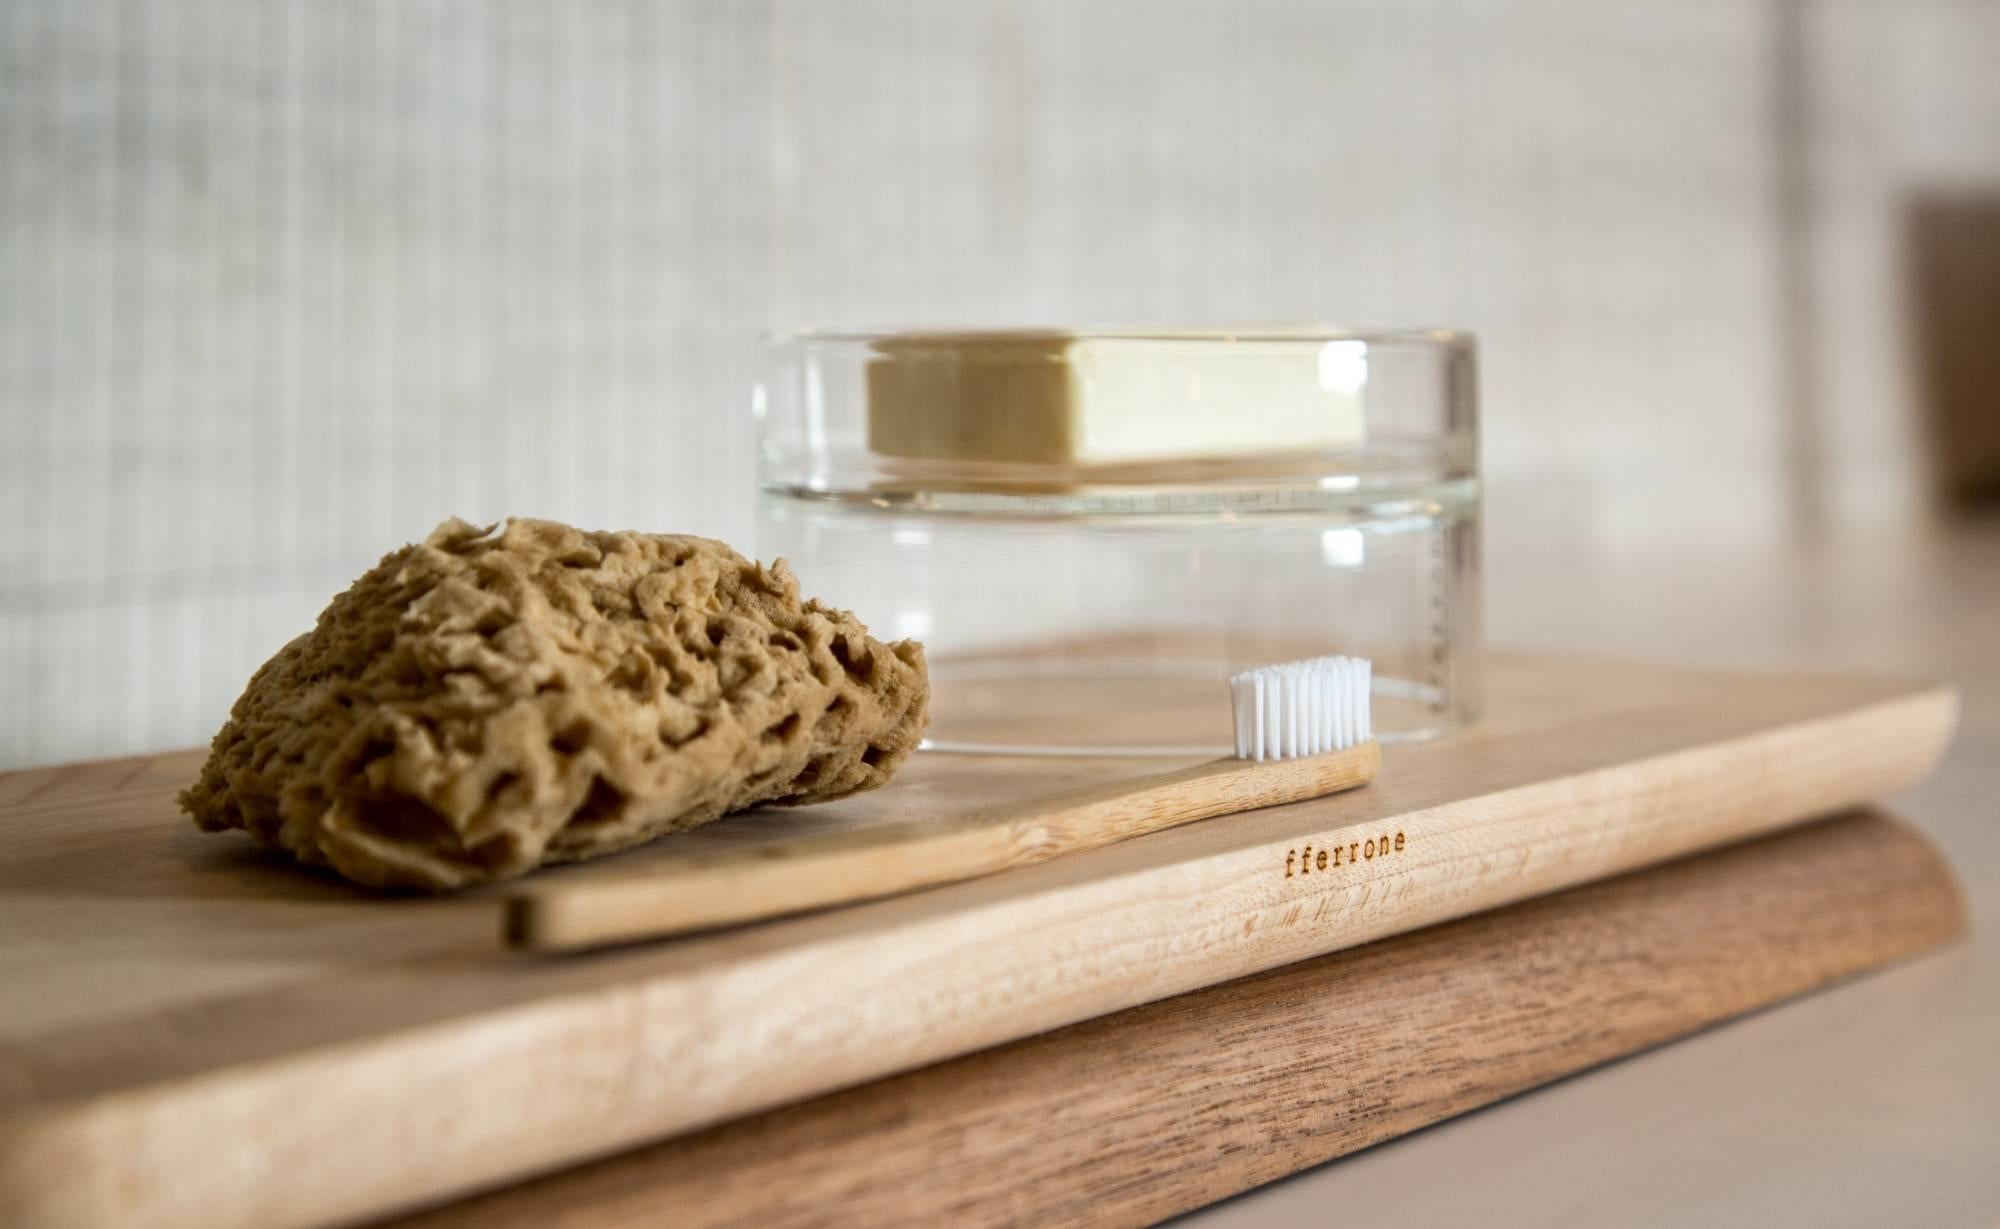 This contemporary serving board, conceived of as a centrepiece, chopping board, serving board, or tray, the Doppio is elegant when in use and when simply sitting on a table or counter. Handcrafted and finished, made of maple and walnut woods, the